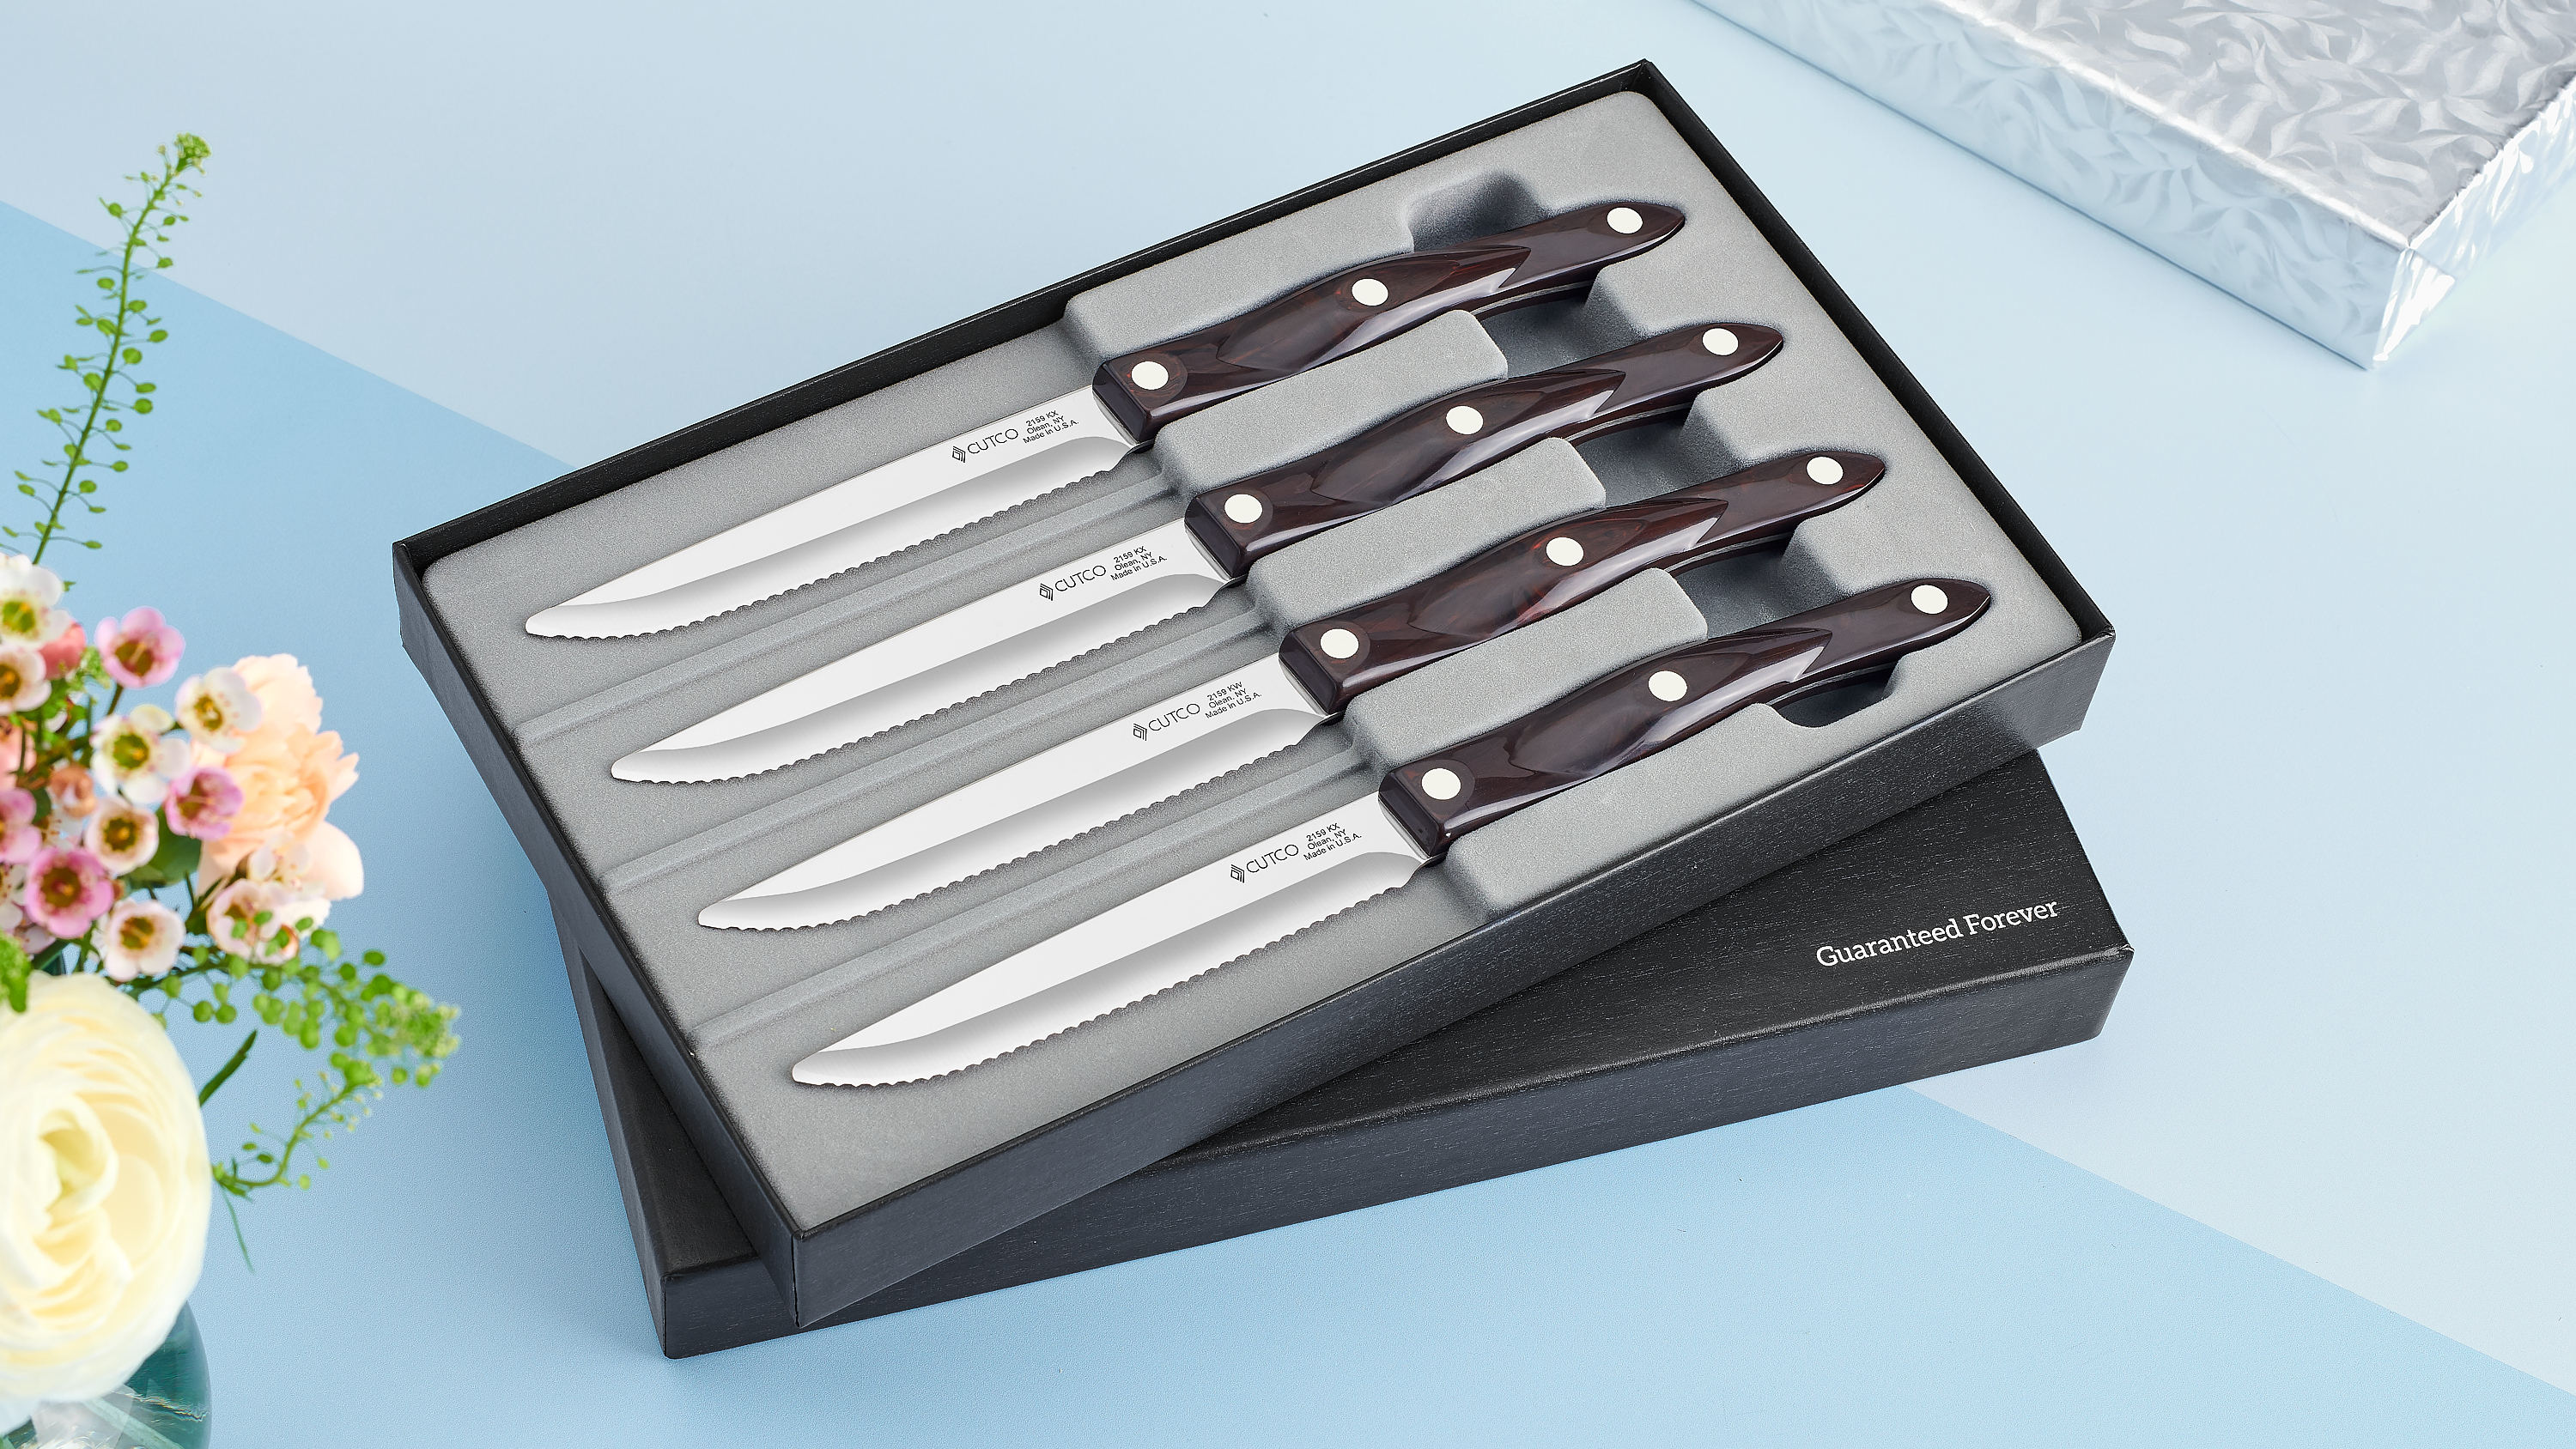 Cutco Knives Review & Giveaway (a $261 knife set!) - The Daring Gourmet